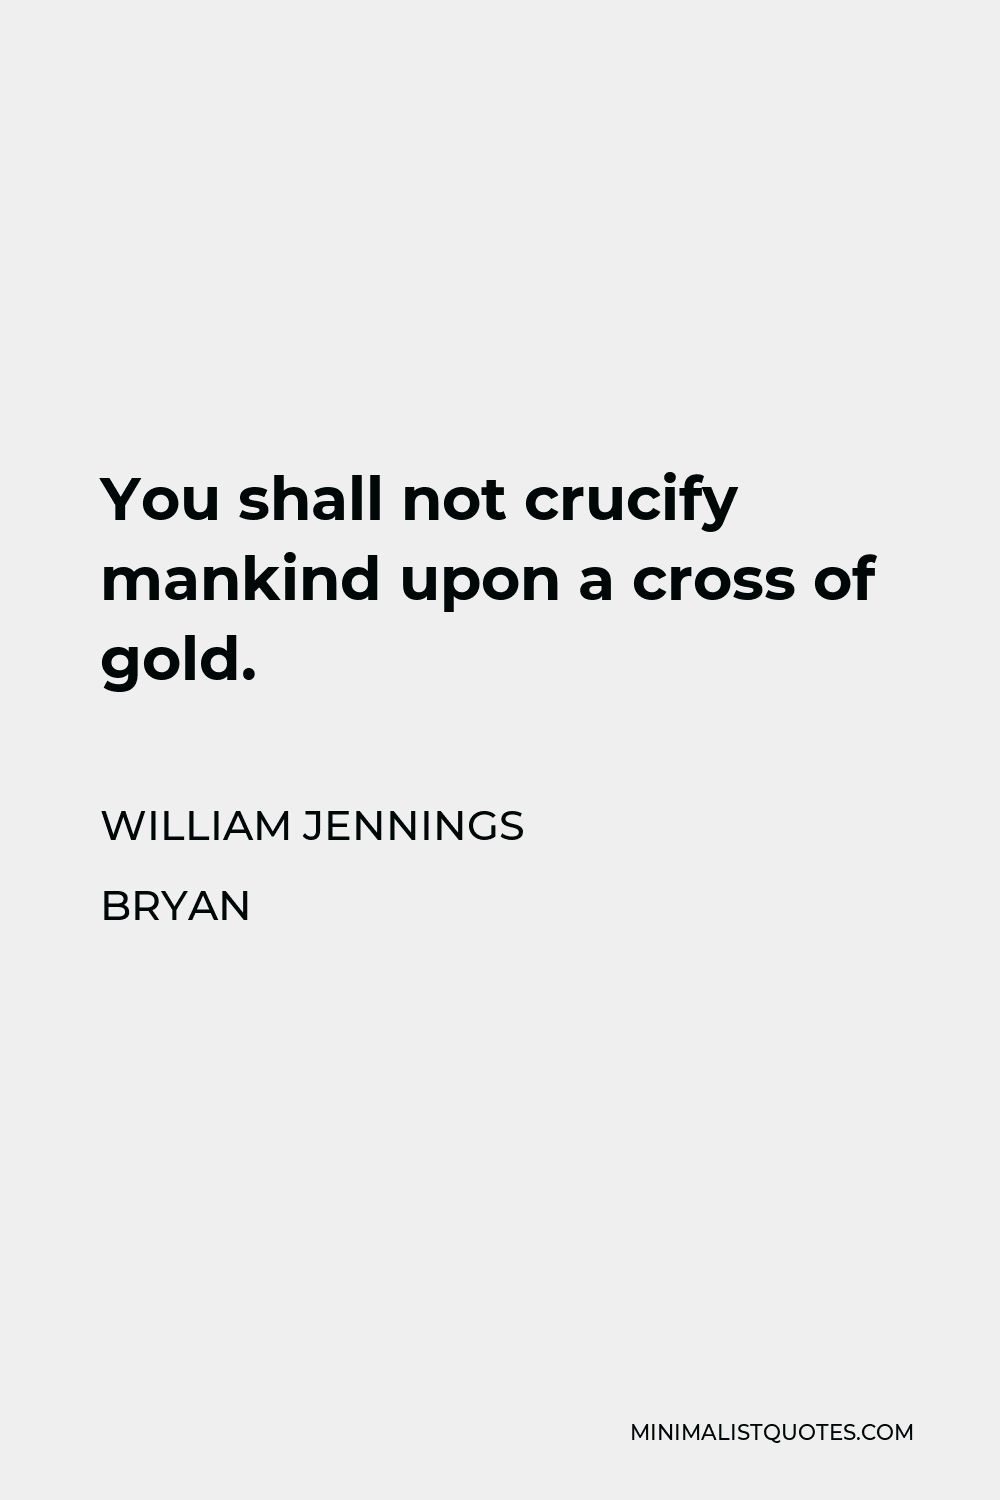 William Jennings Bryan Quote - You shall not crucify mankind upon a cross of gold.